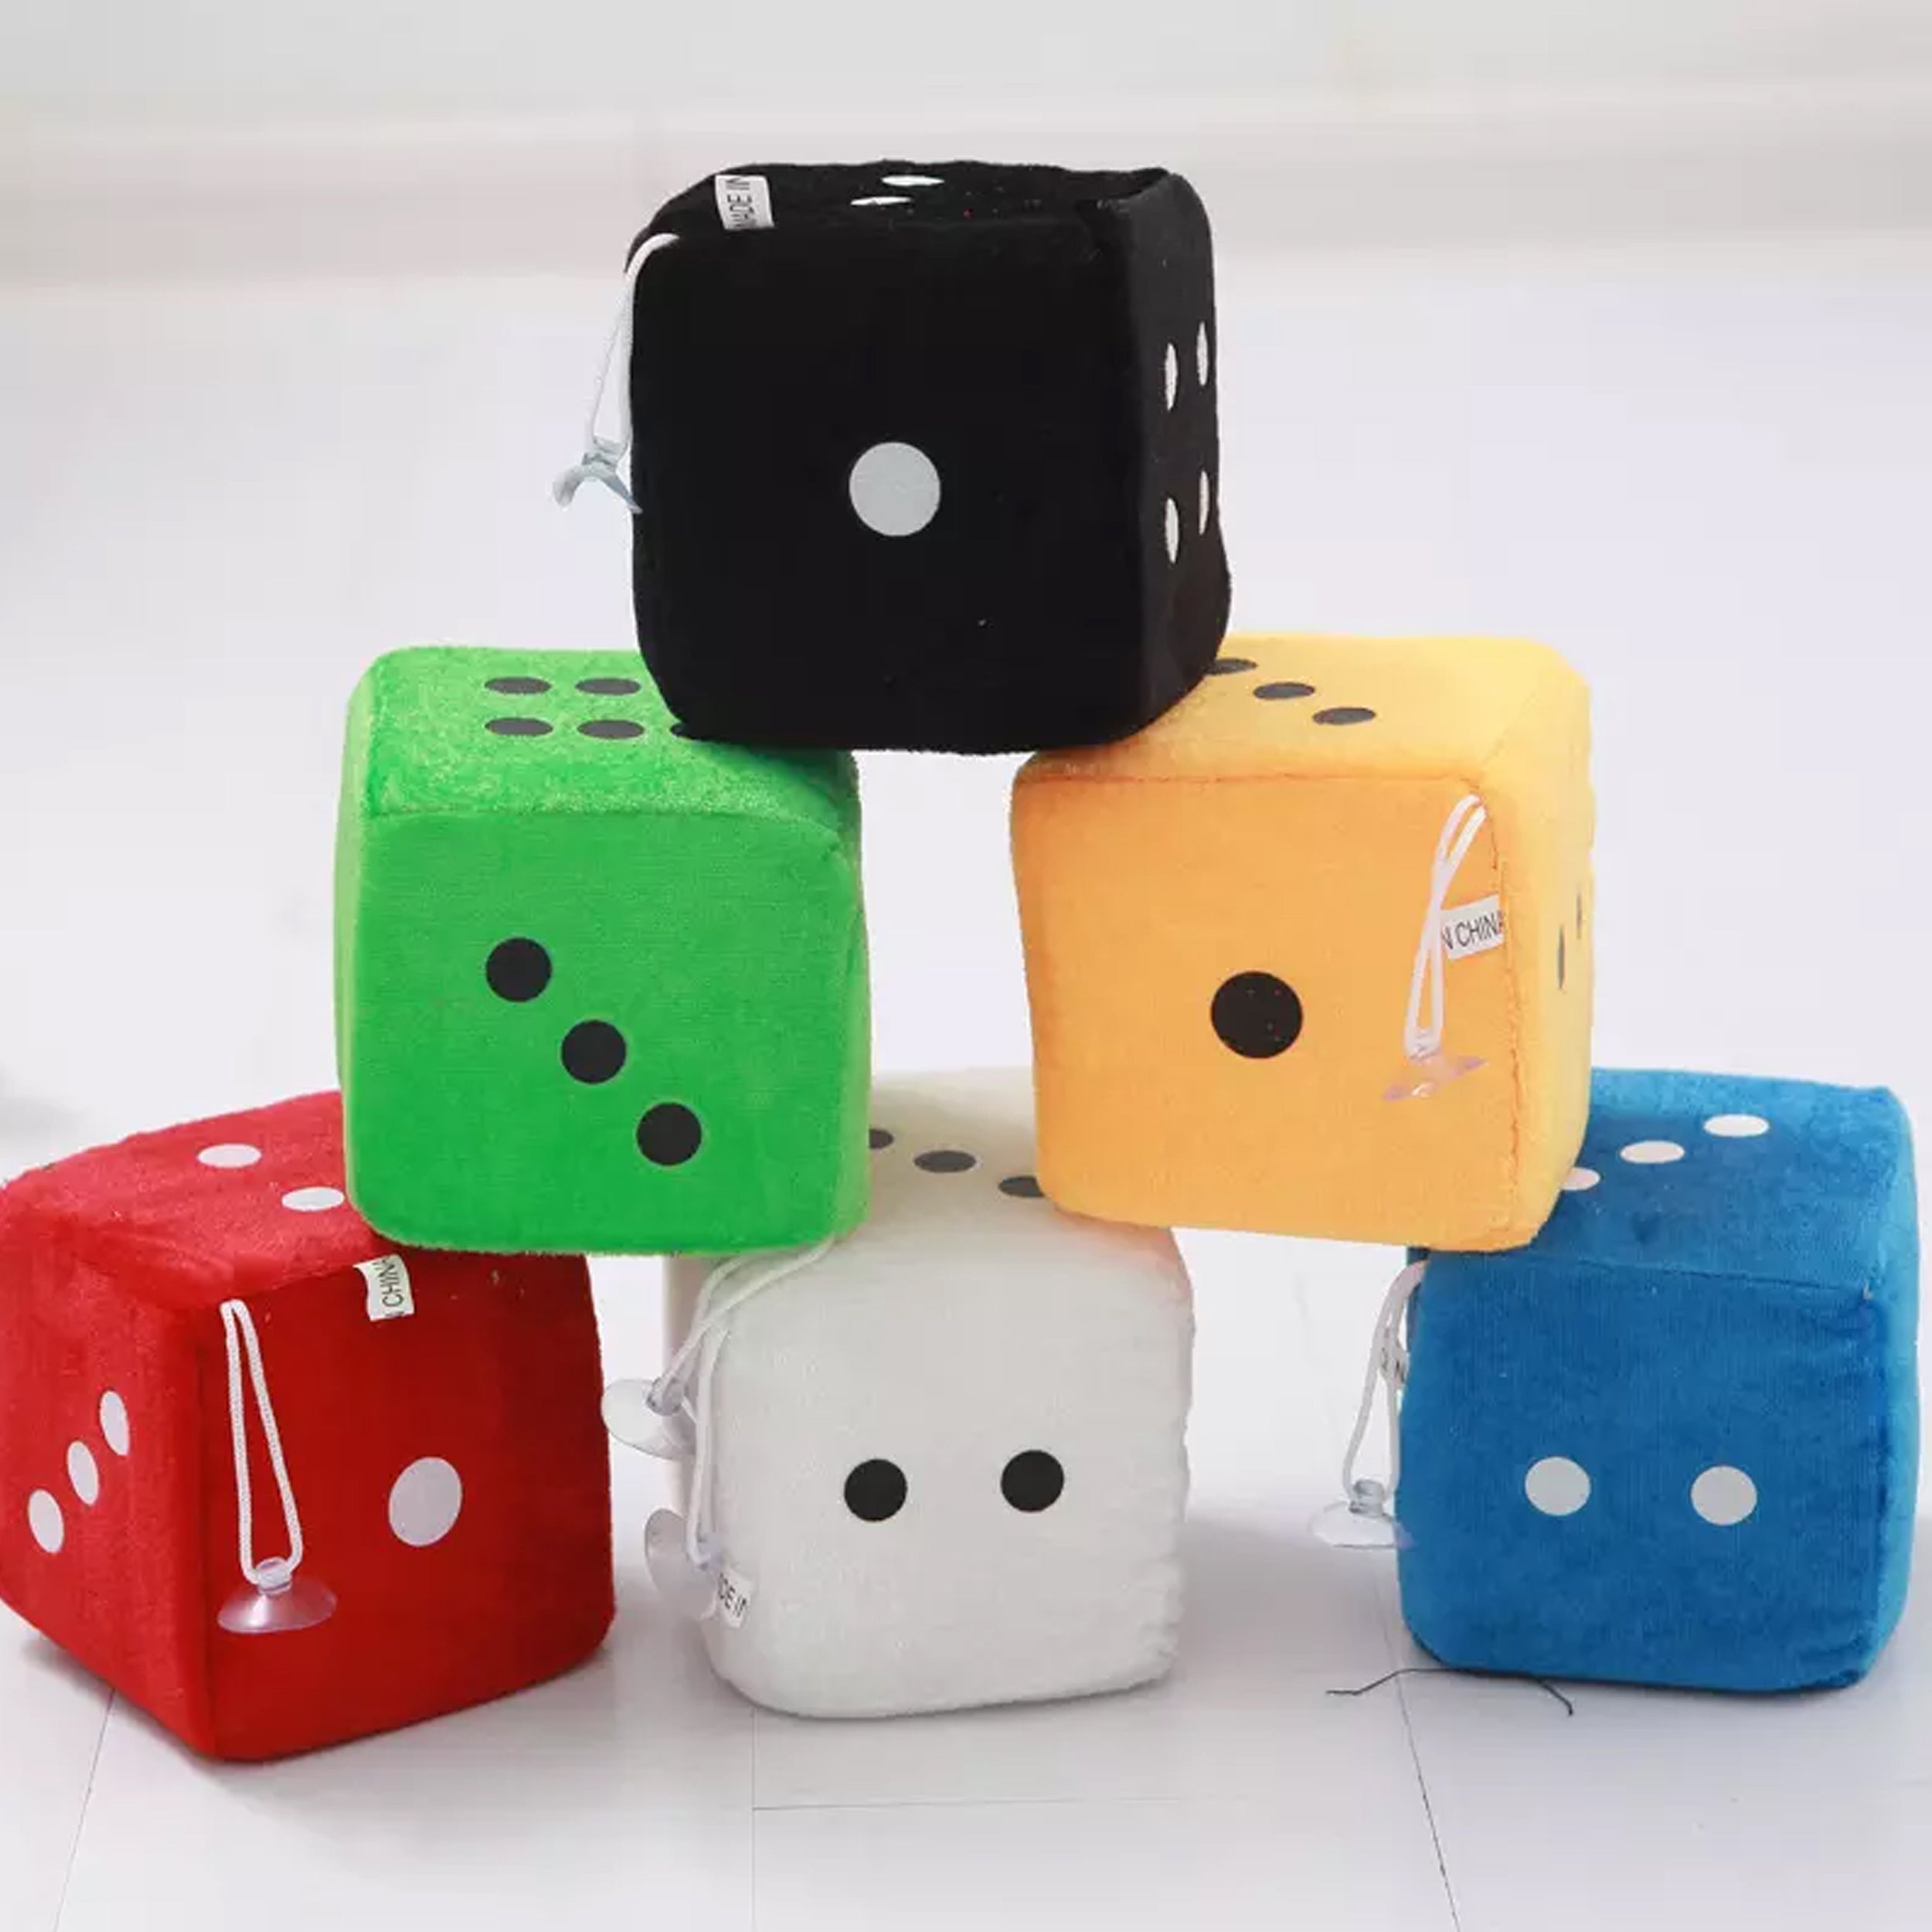 Add Some Fun and Flair with Assorted Window/Car Hanging Dice Plush Fuzzy Toy